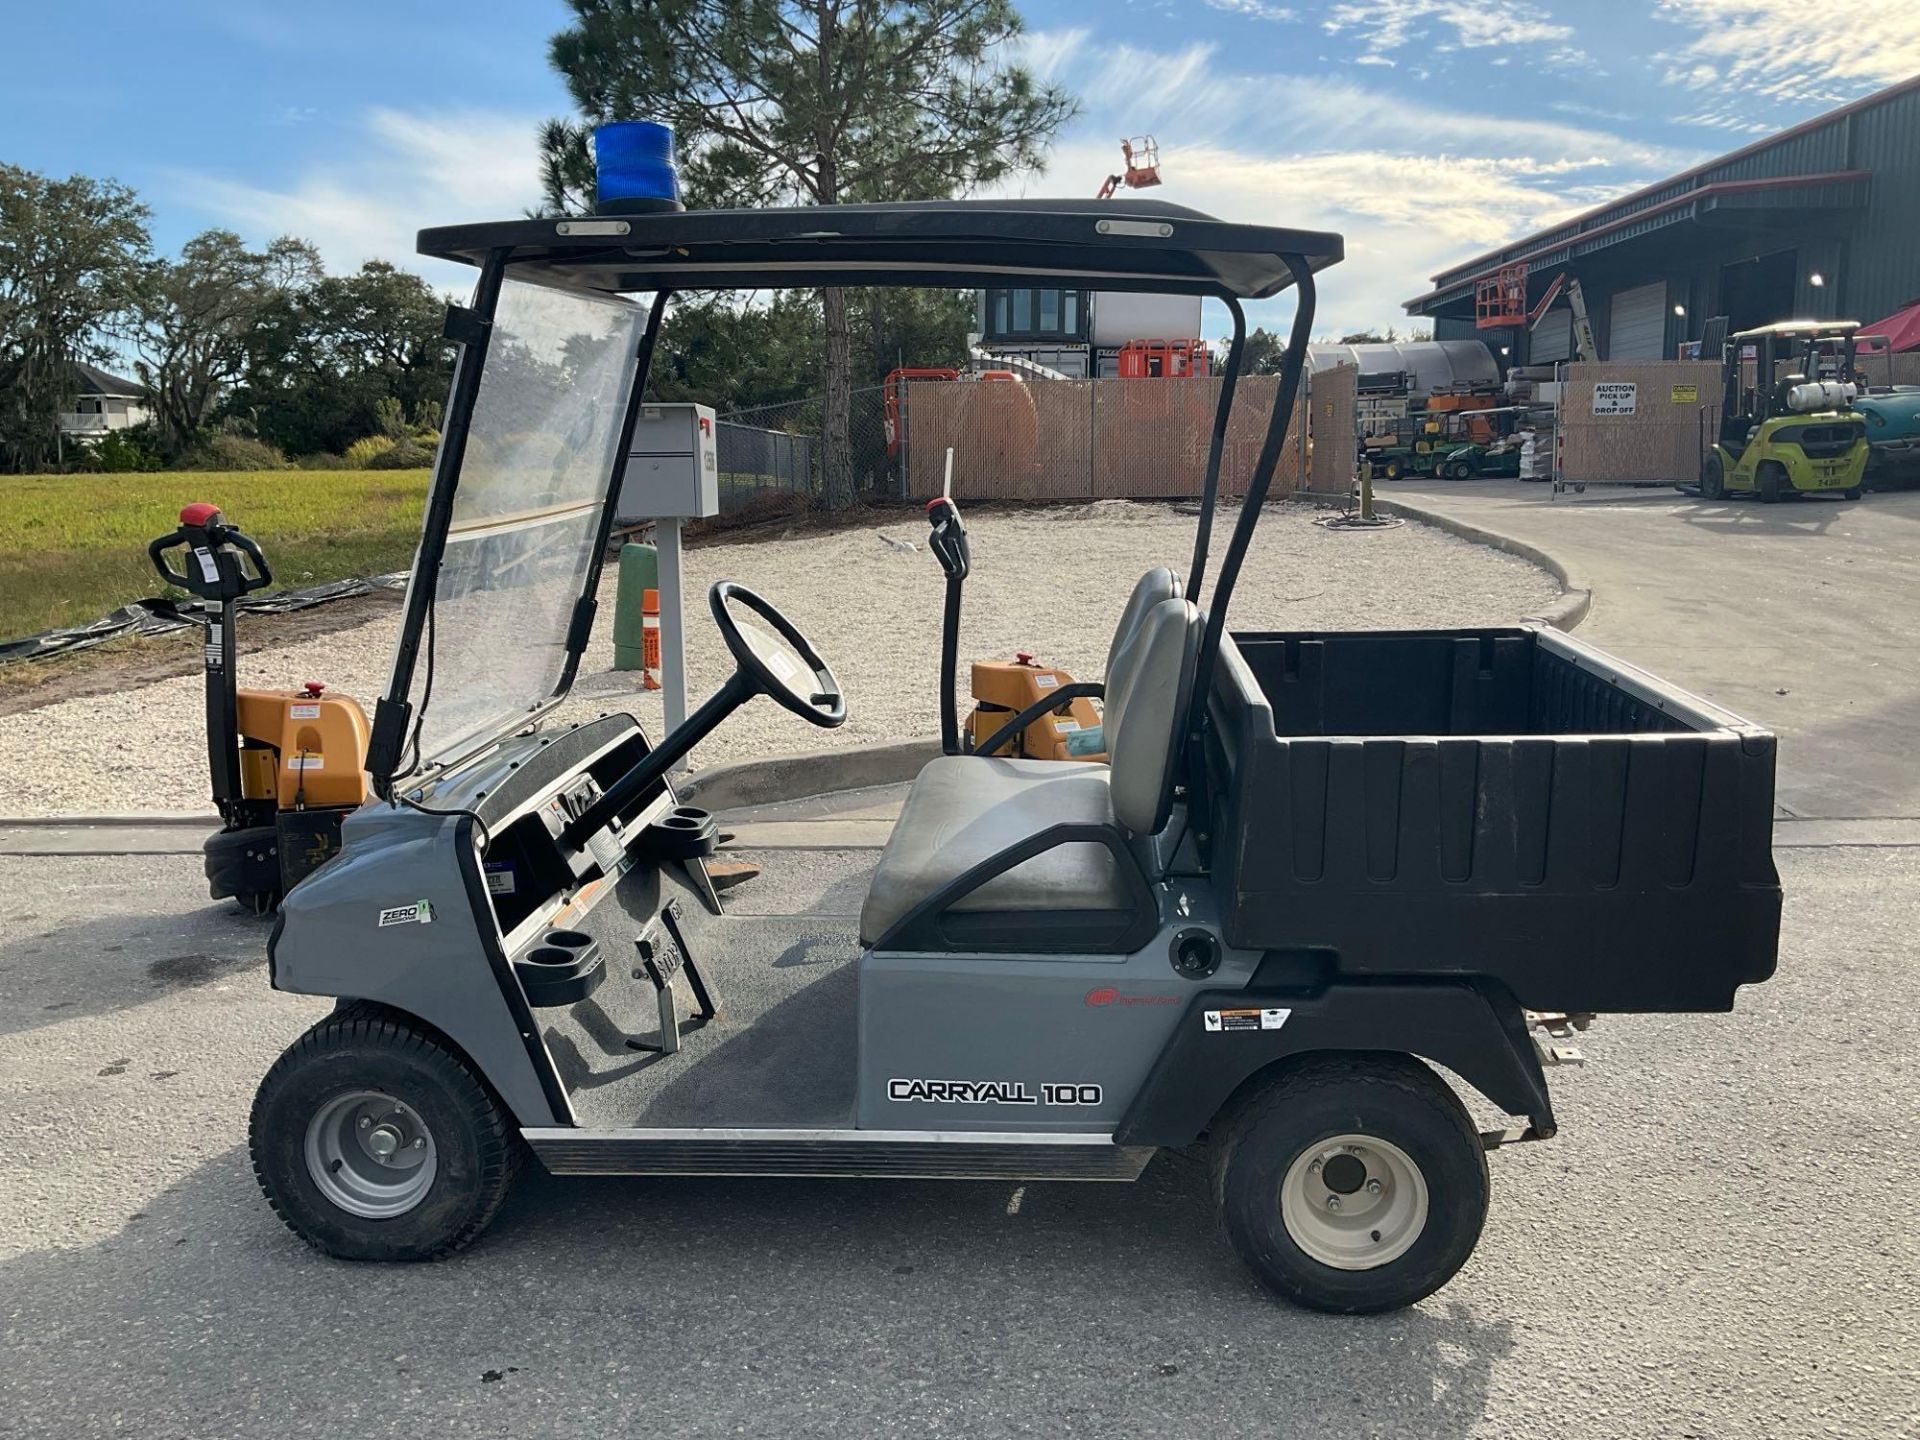 2019 CLUB CAR CARRYALL 100 GOLF CART MODEL FC, ELECTRIC, MANUAL DUMP BED,BILL OF SALE ONLY, - Image 4 of 11